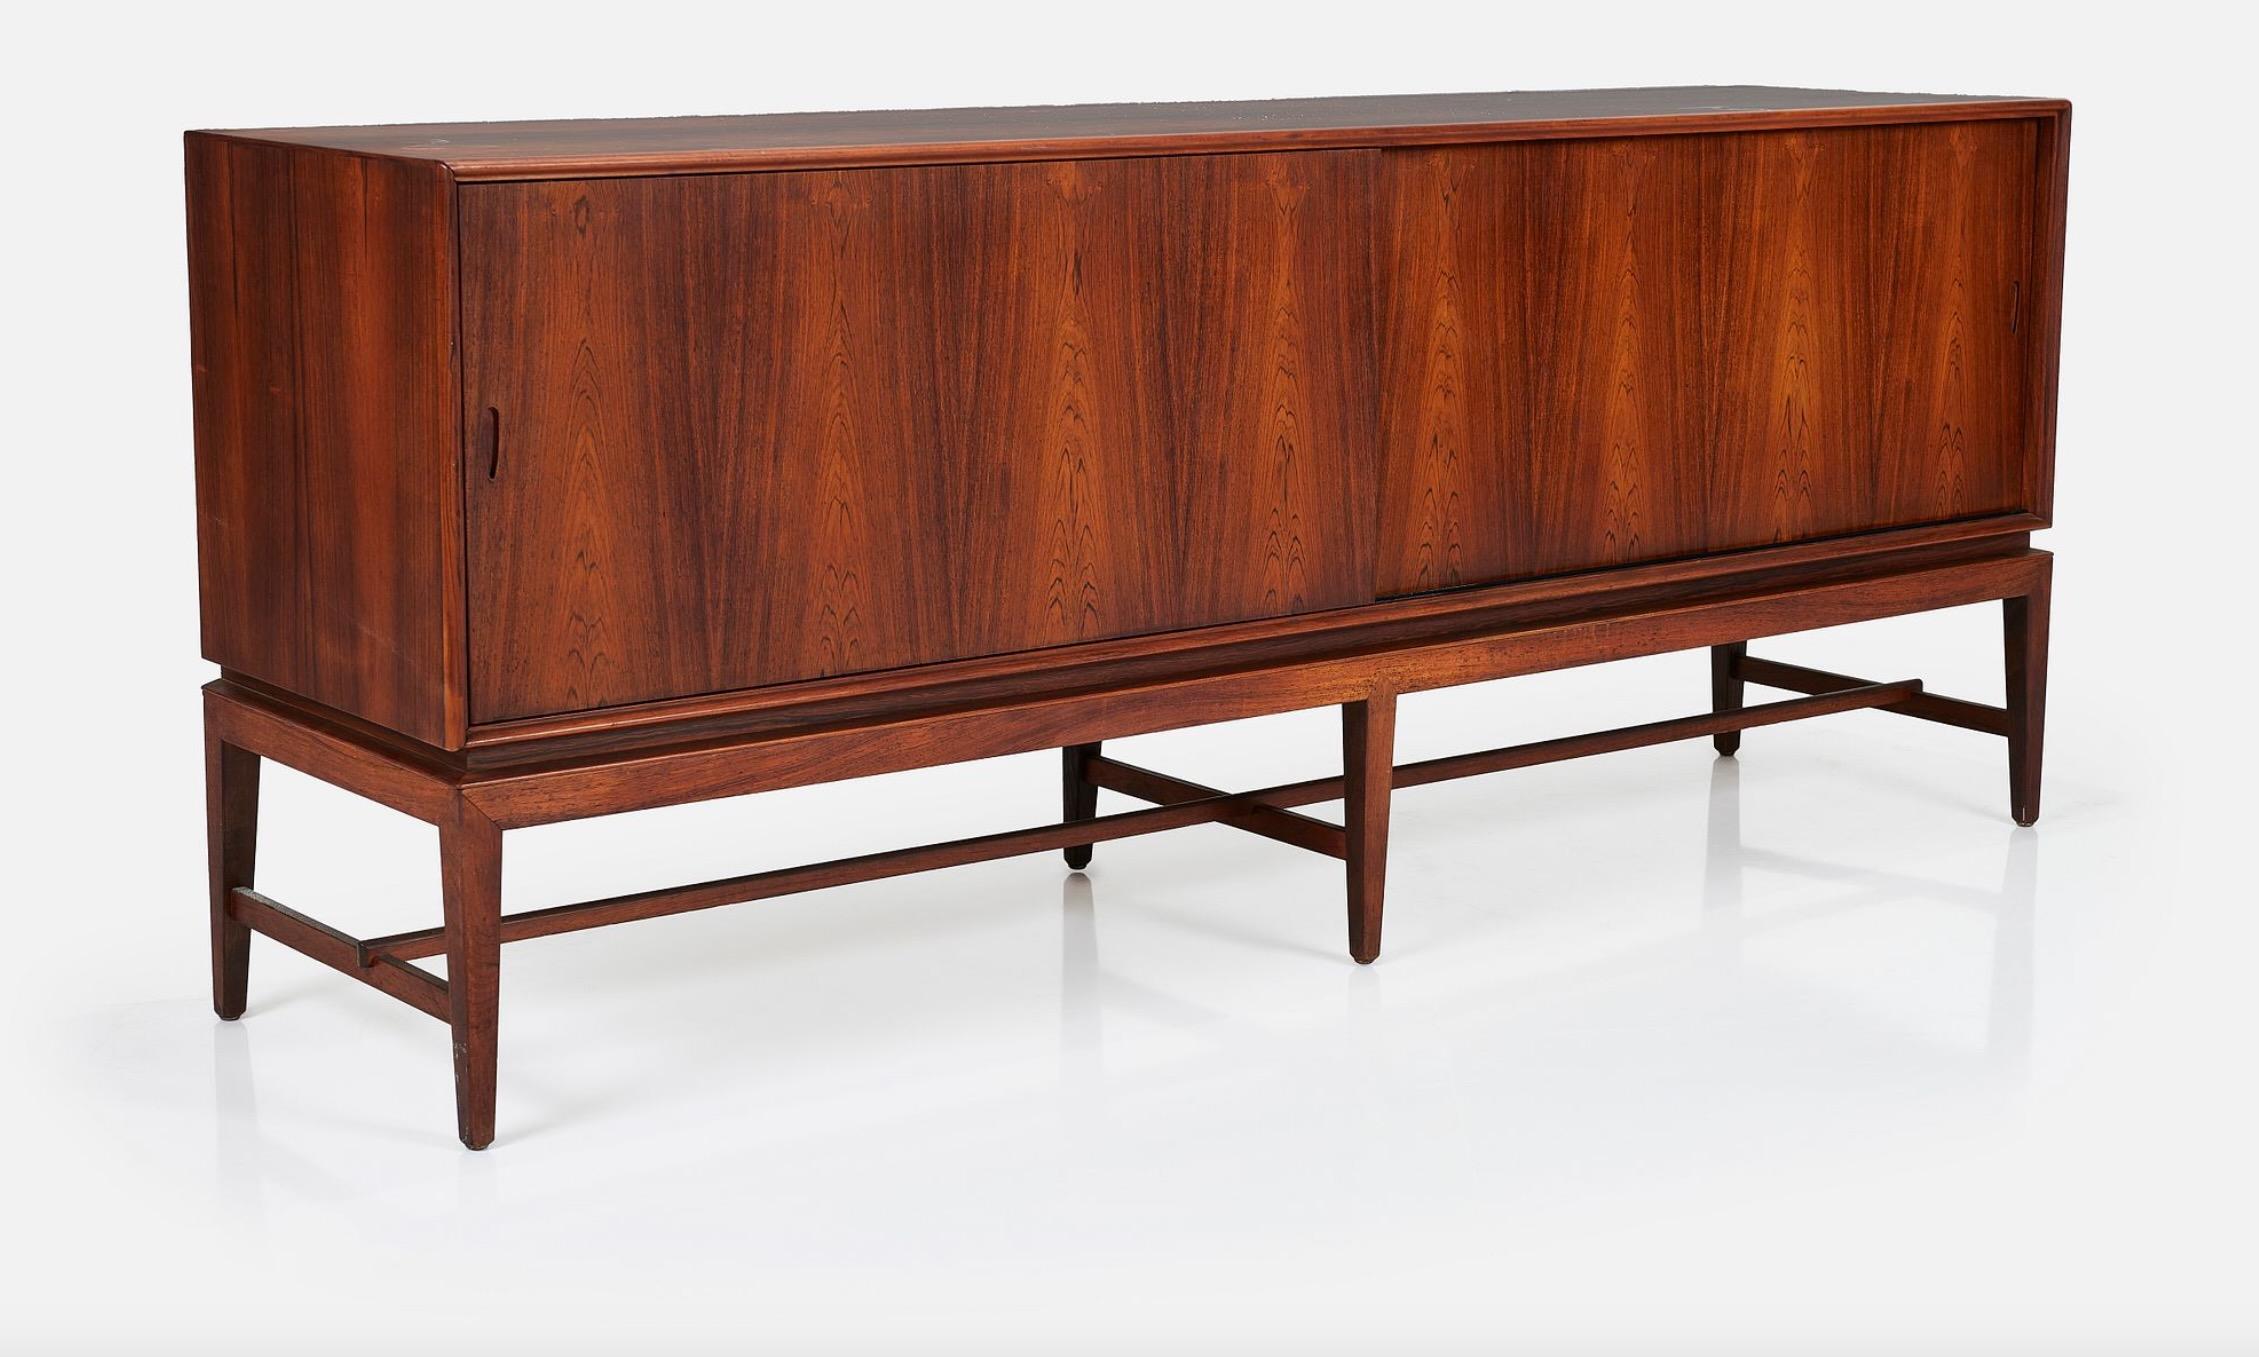 Severin Hansen Jr. rosewood credenza, c1960, Denmark.  This piece features a spacious interior with shelves and drawers concealed behind a sliding door. 
In the 1950s and early '60s, Haslev Møbelsnedkeri, a furniture manufacturer in Haslev near